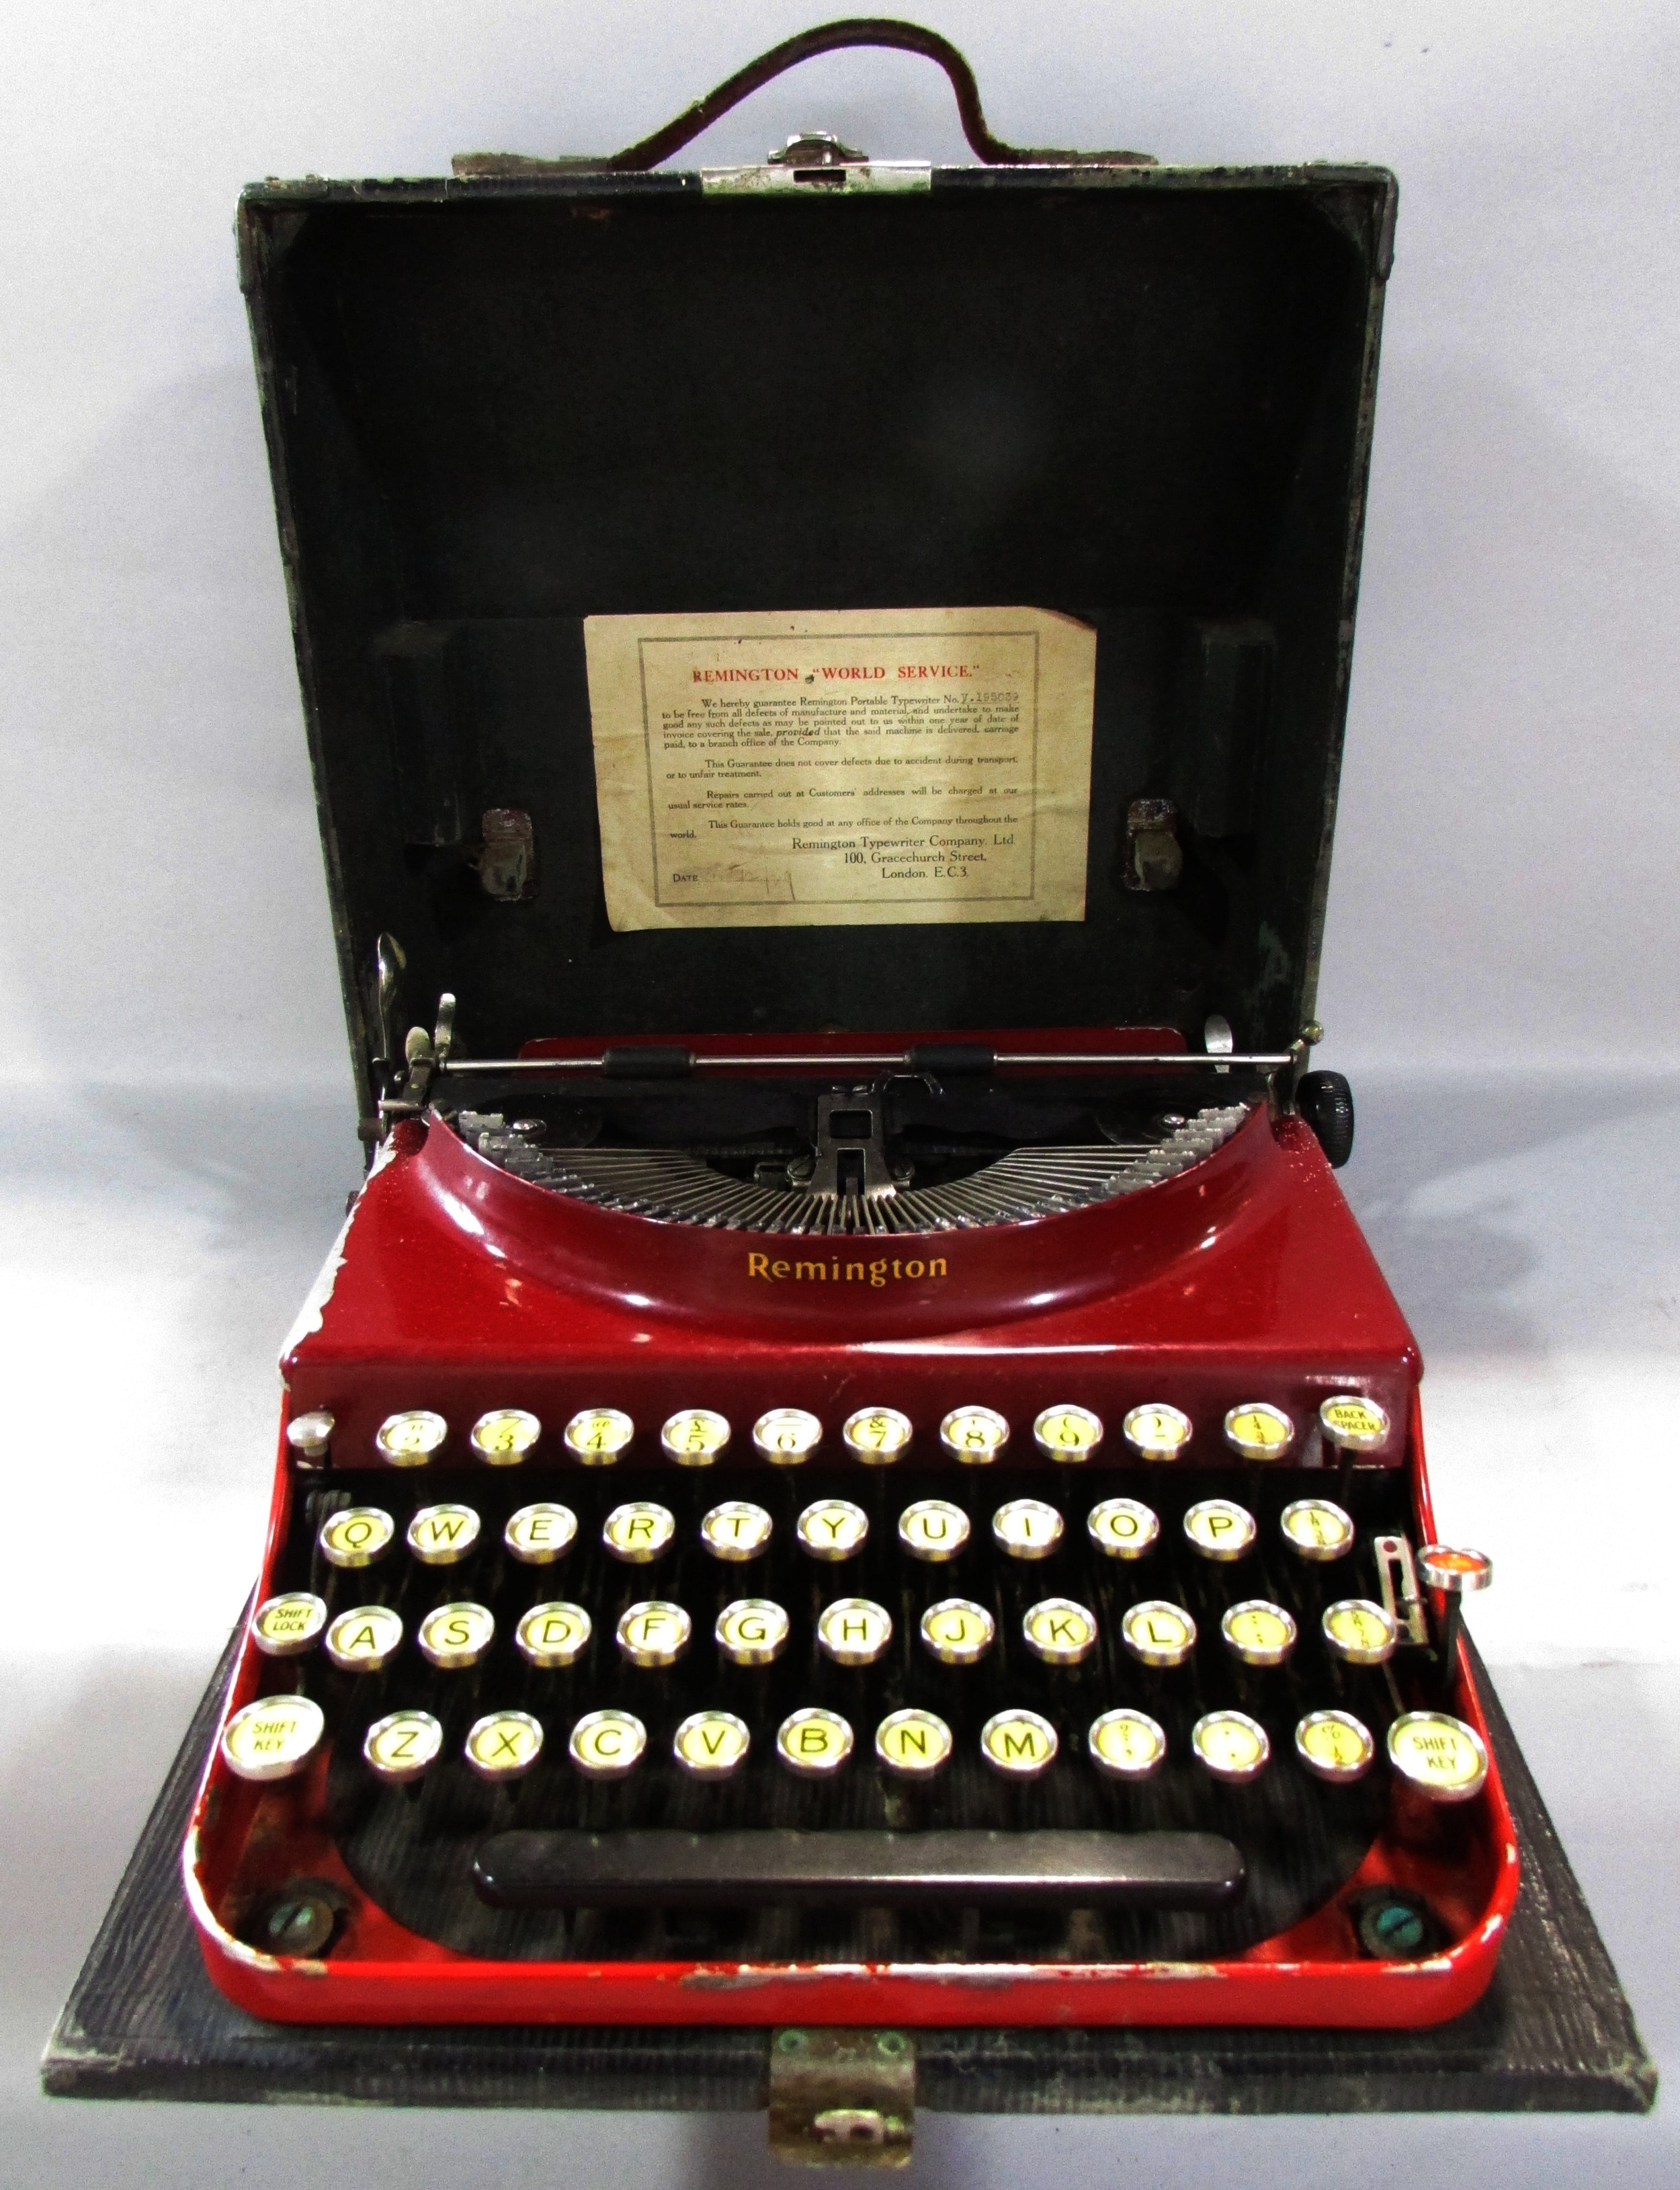 A Remington red painted “World Service” portable typewriter Serial number V.195039, in its carry